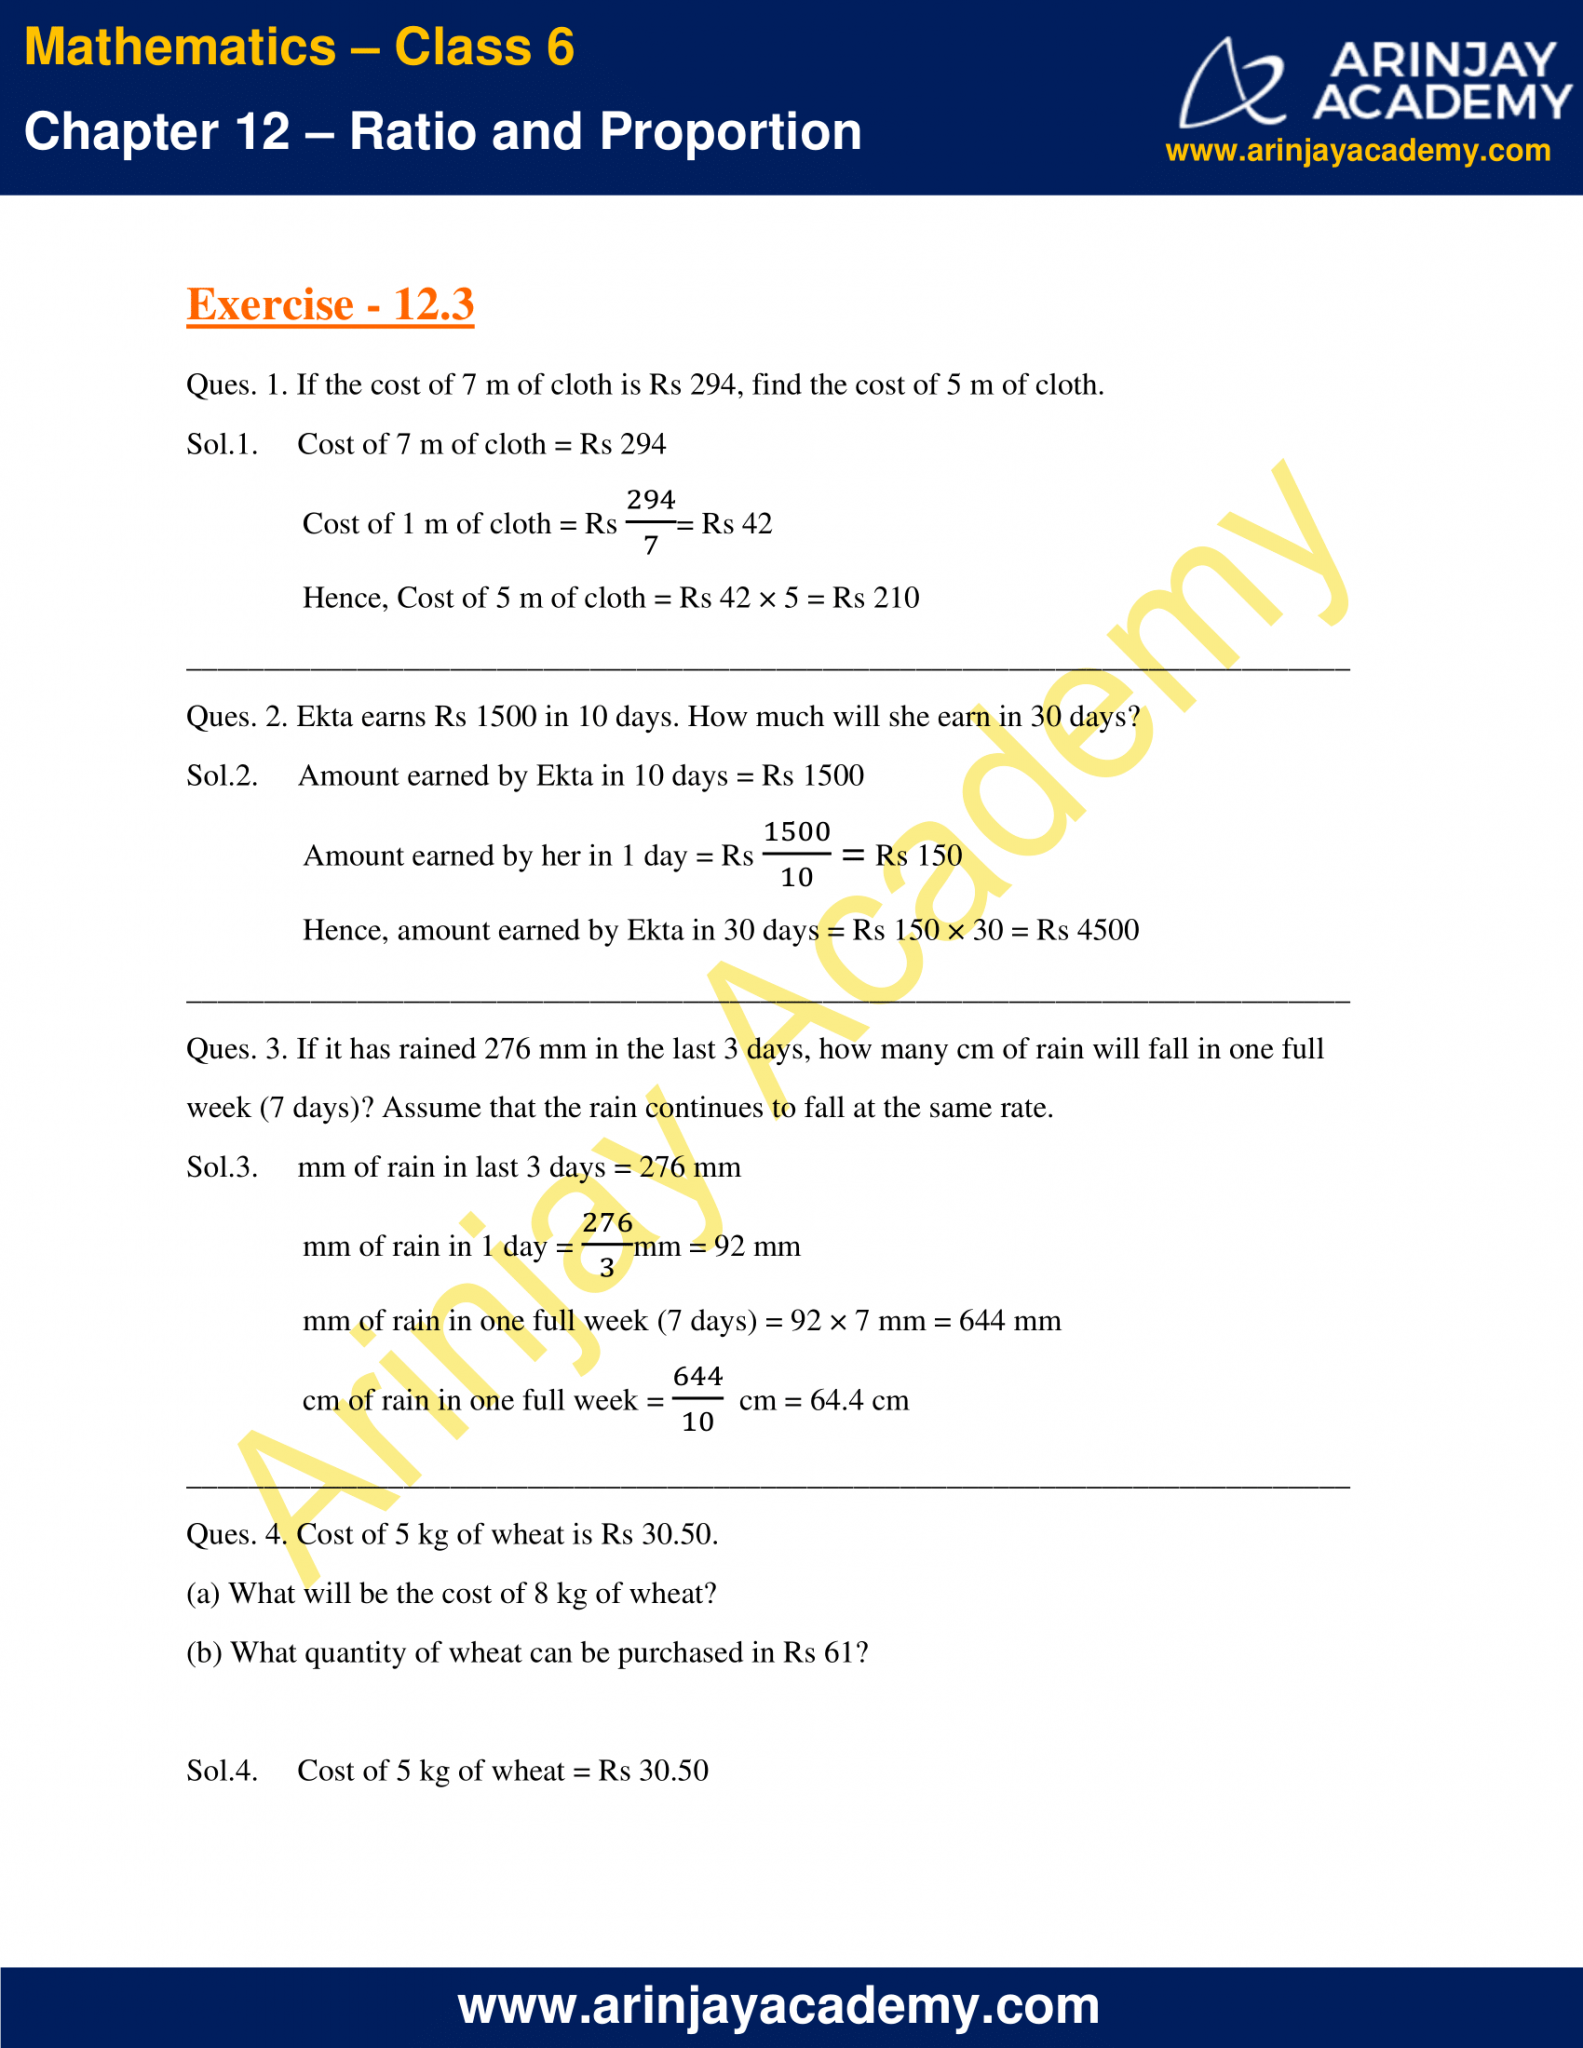 ncert-solutions-for-class-6-maths-chapter-12-ratio-and-proportions